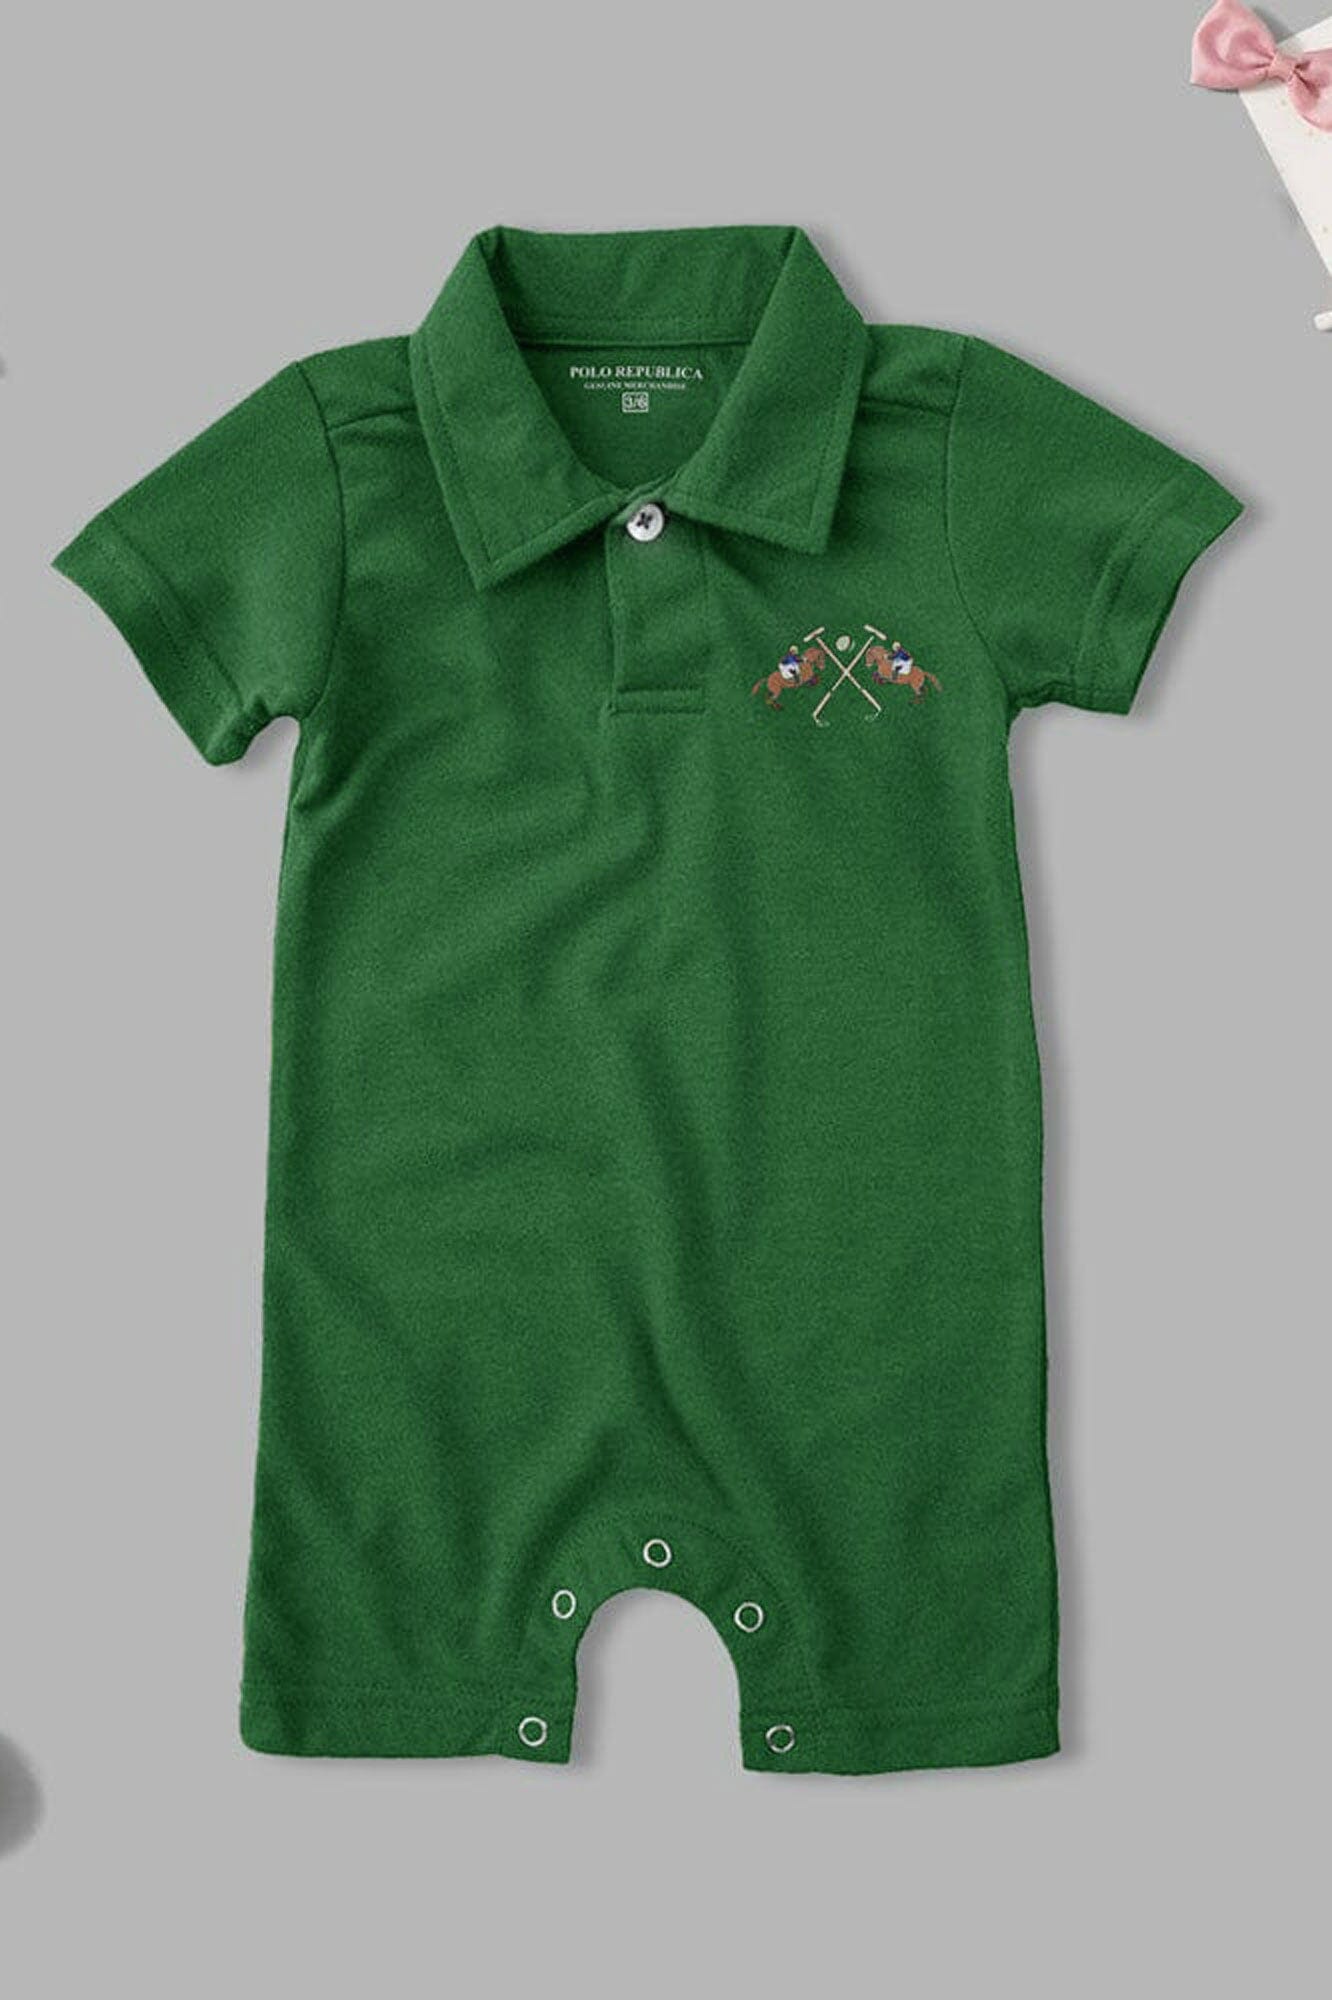 Polo Republica Double Pony Printed Design Short Sleeve Baby Romper Romper Polo Republica Bottle Green 0-3 Months 